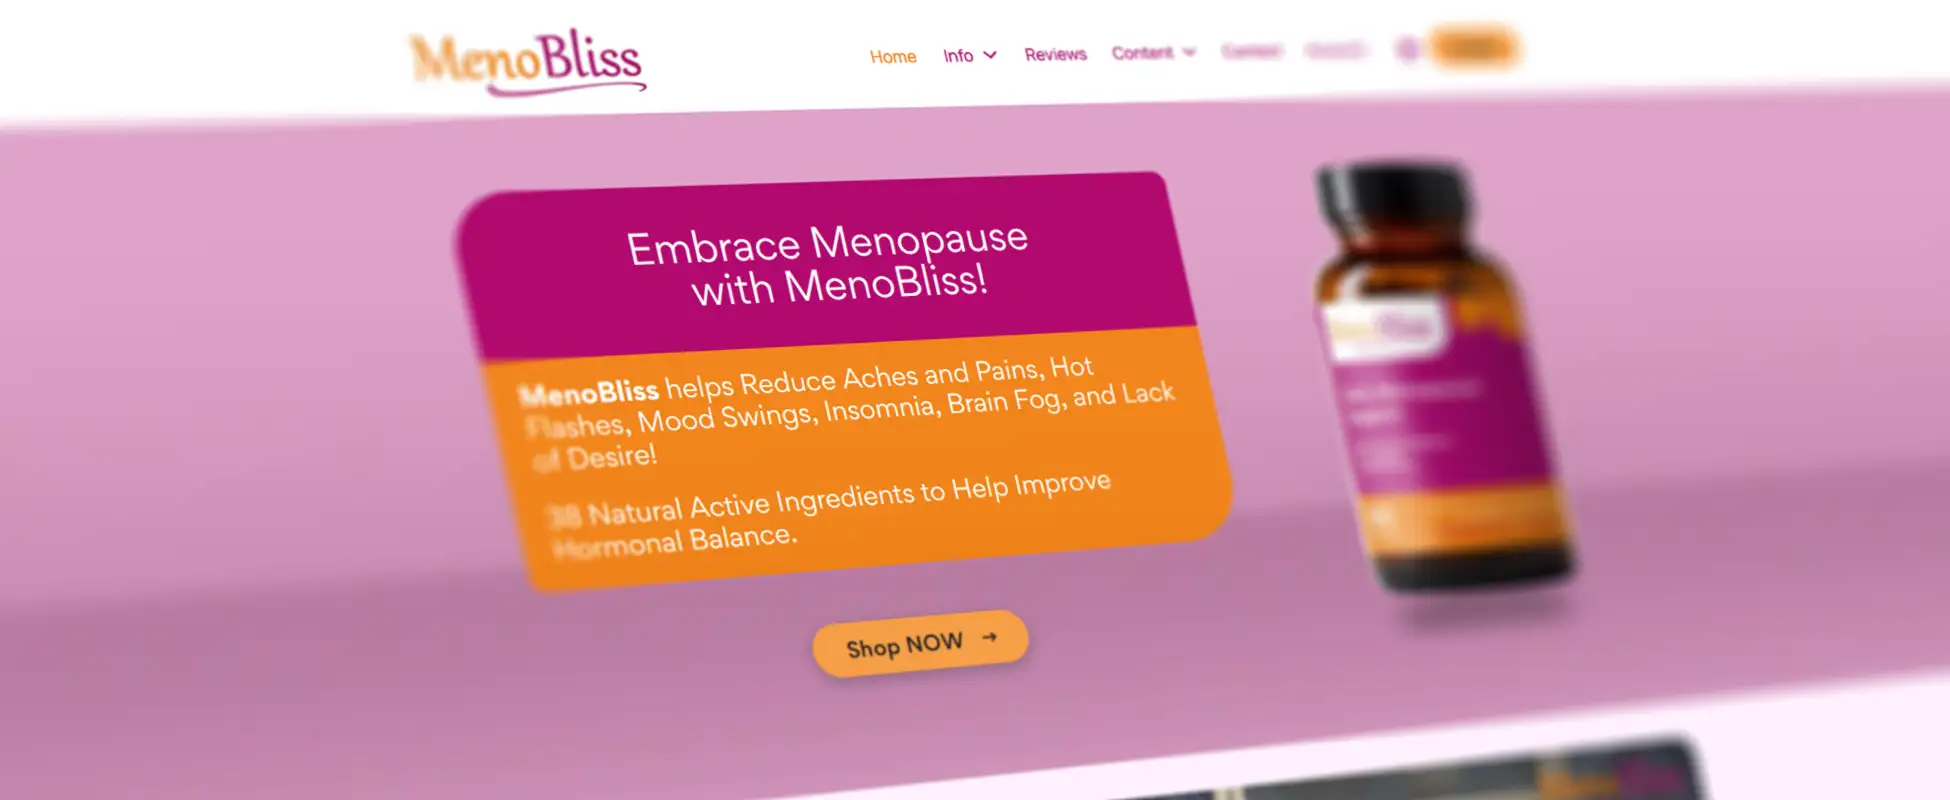 The Genesis of MenoBliss: More Than Just Hot Flashes and Mood Swings